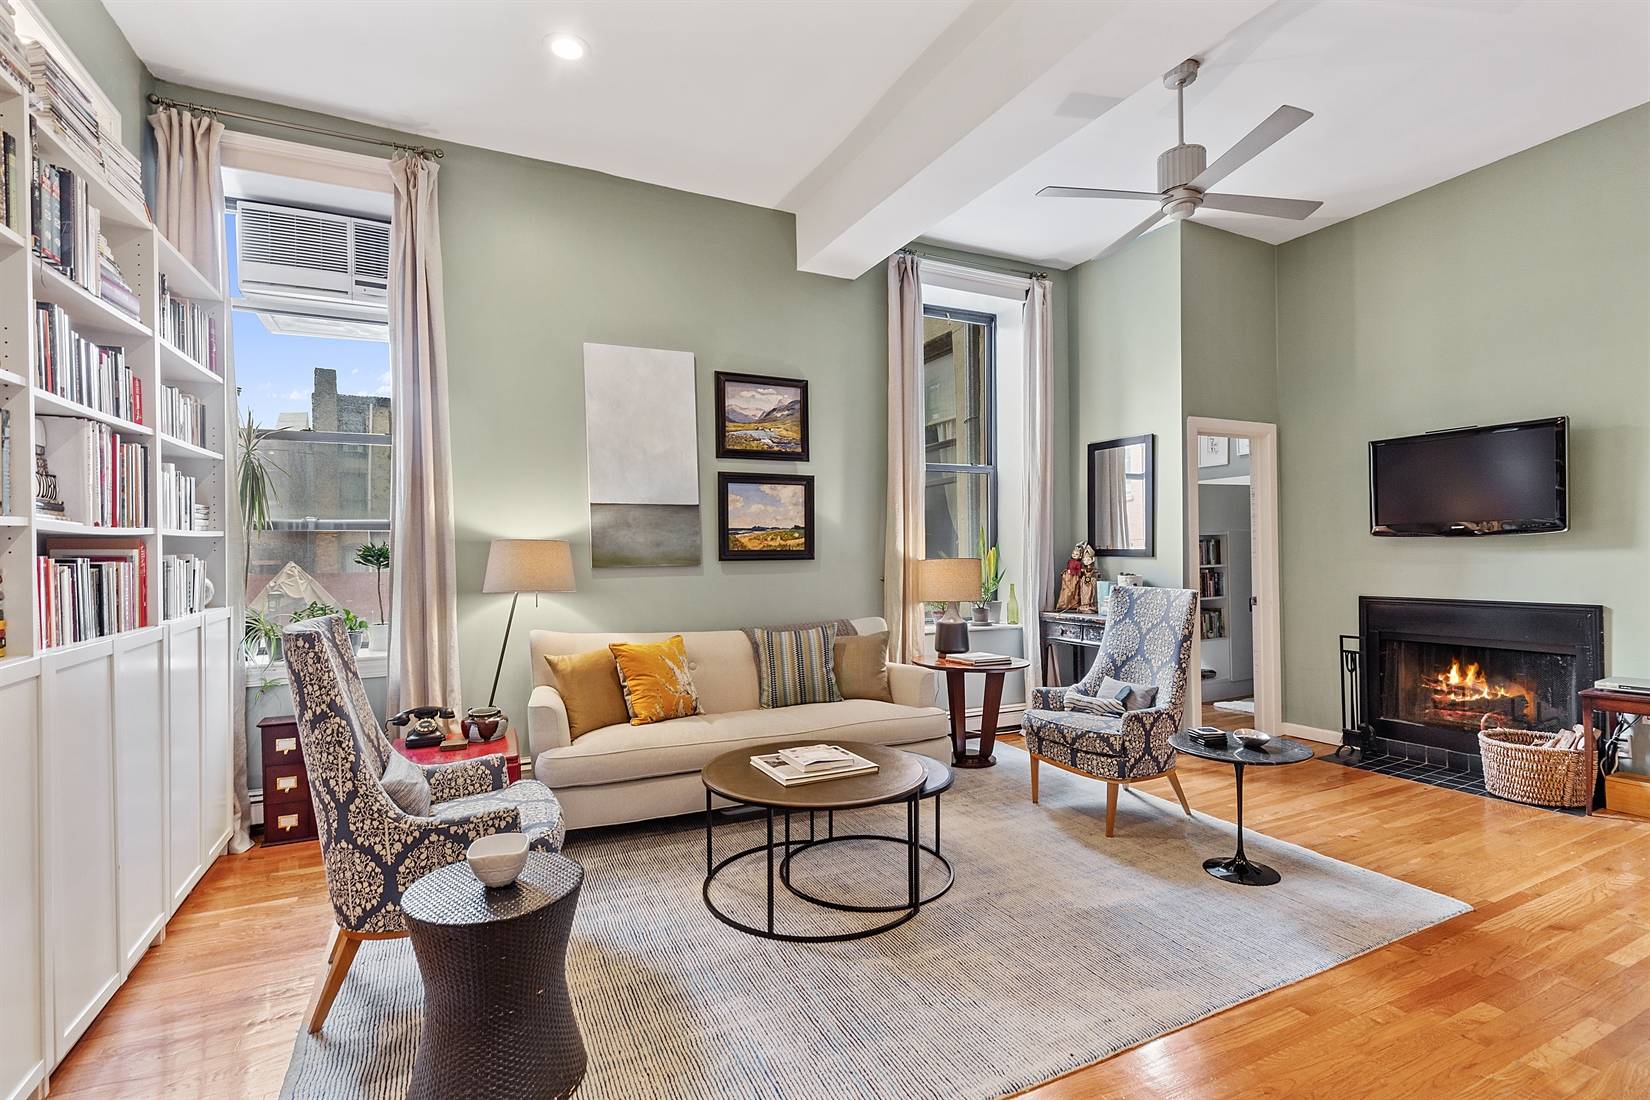 With three bedrooms, 12' soaring ceilings, a WOODBURNING FIREPLACE, exposed brick, and a renovated kitchen and bath, apartment 2C at 157 Waverly has remarkable proportions and a loft like feel ...